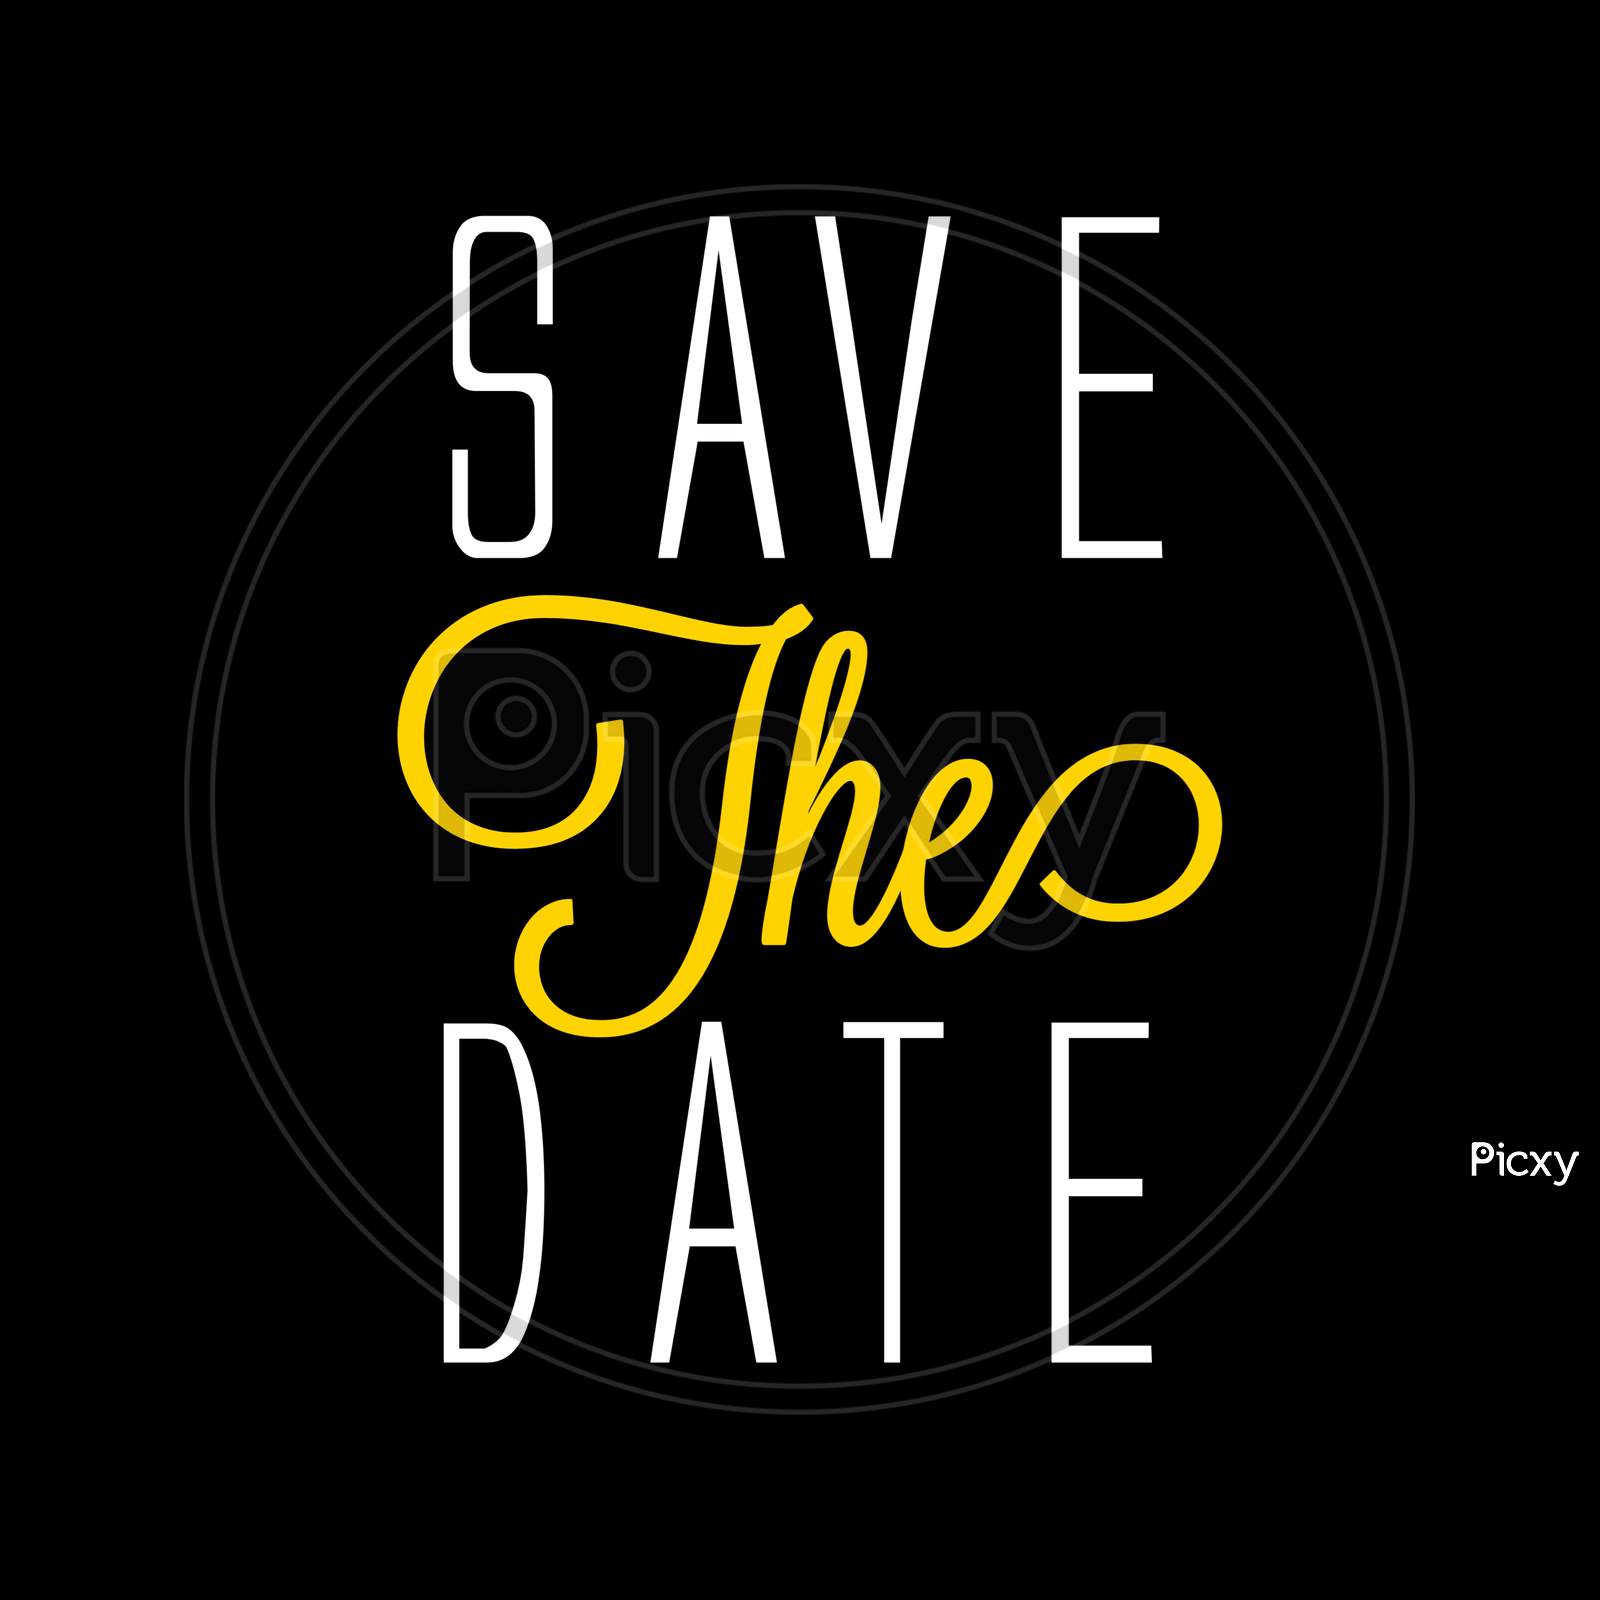 Save The Date (black background with white and yellow color fonts)